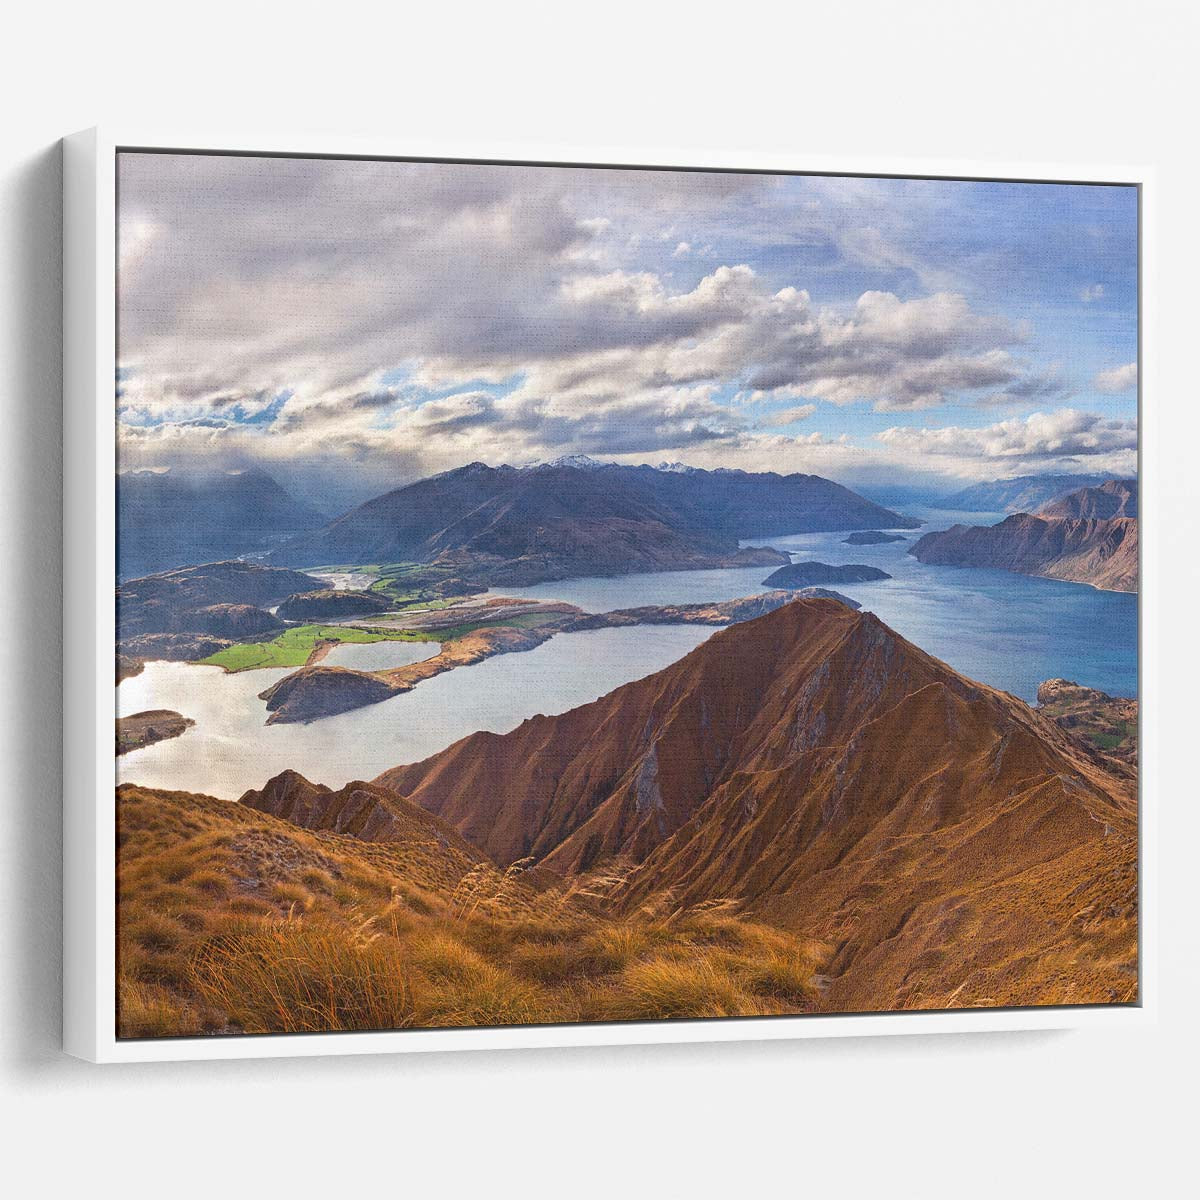 Roy's Peak Panoramic New Zealand Landscape Wall Art by Luxuriance Designs. Made in USA.